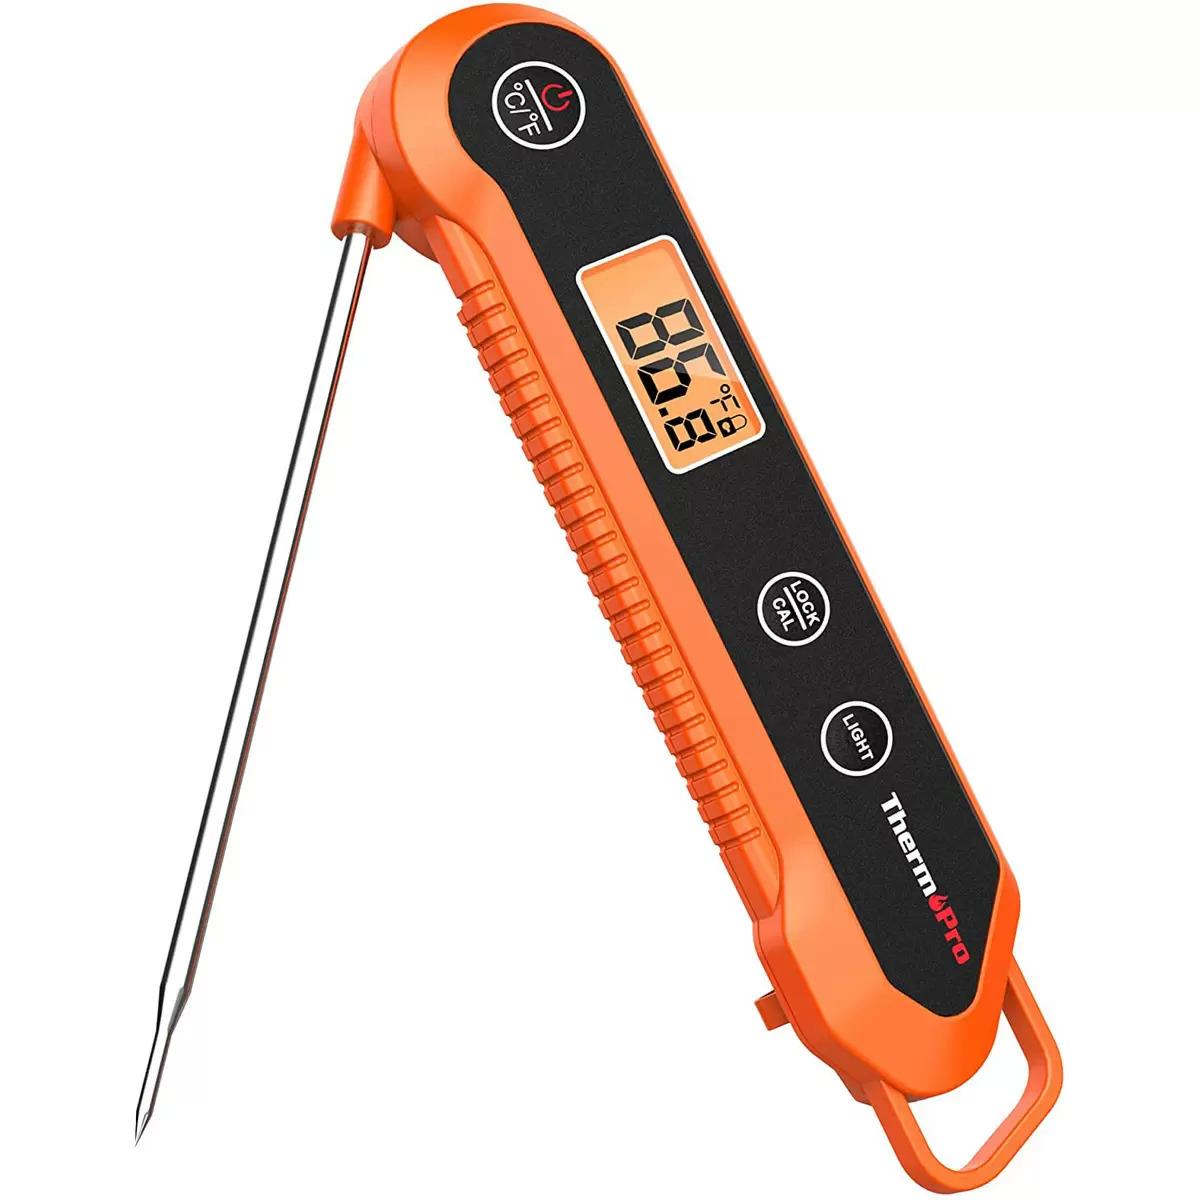 ThermoPro Digital Instant Read Meat Thermometer for $10